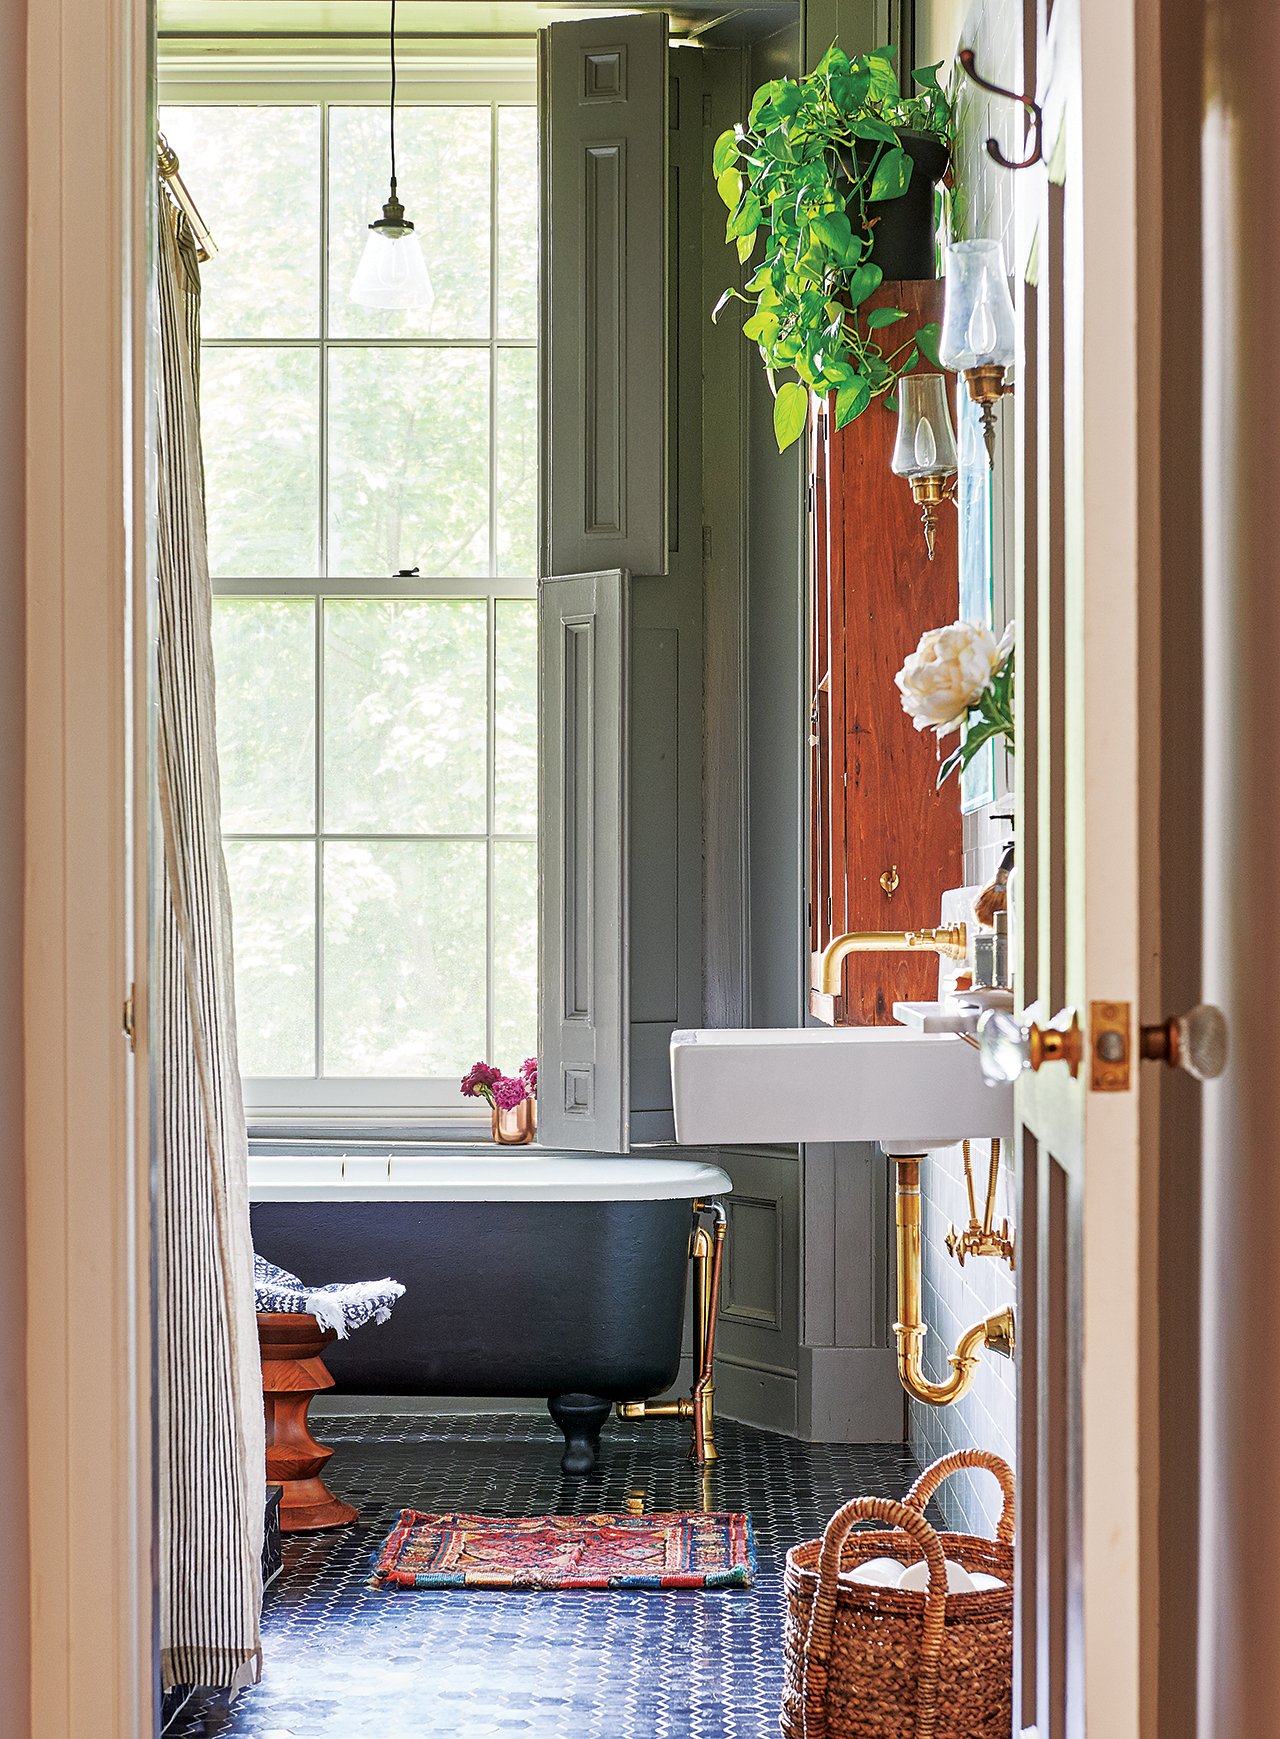 A glimpse into the stone house's bathroom, with big windows and a footed tub.